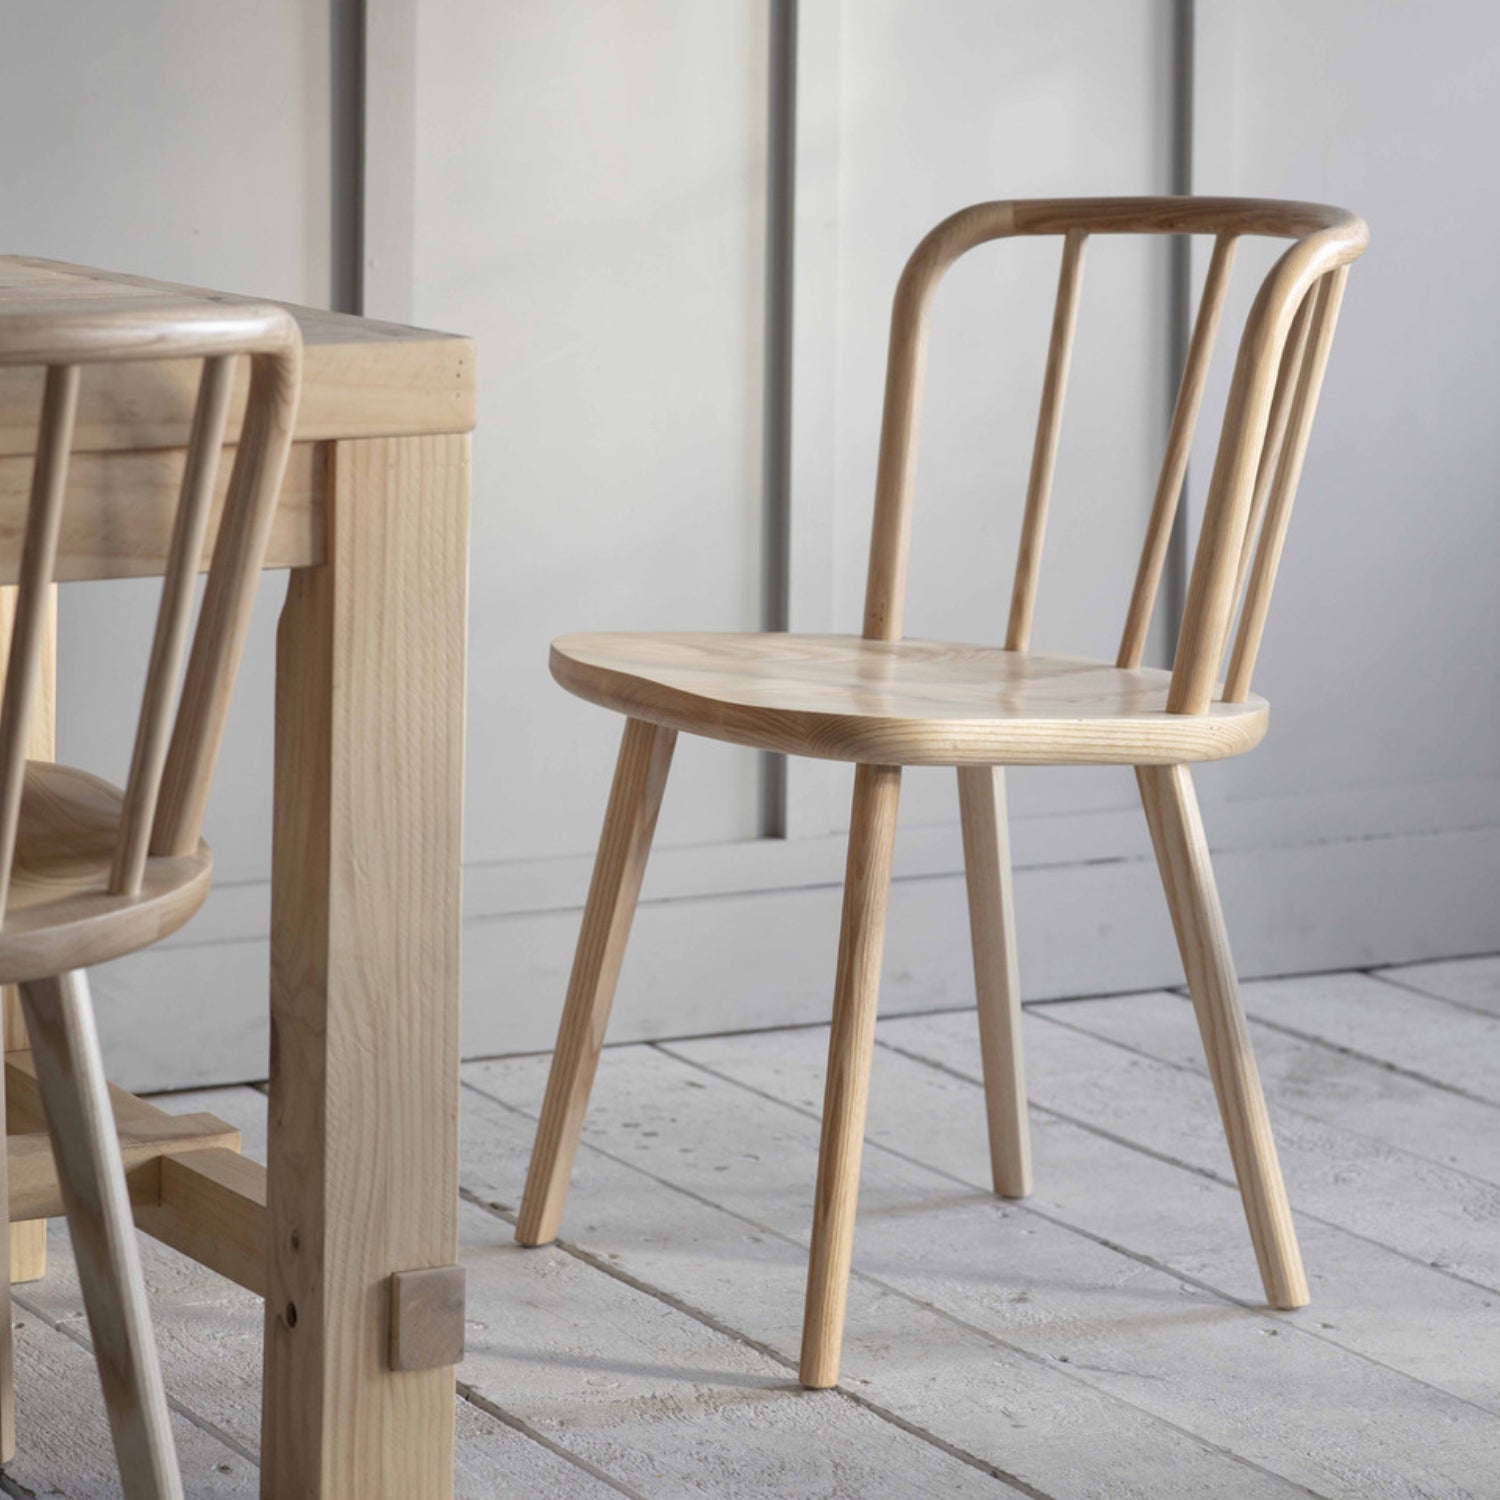 Pair of Uley Chairs in Natural by Garden Trading - Ash